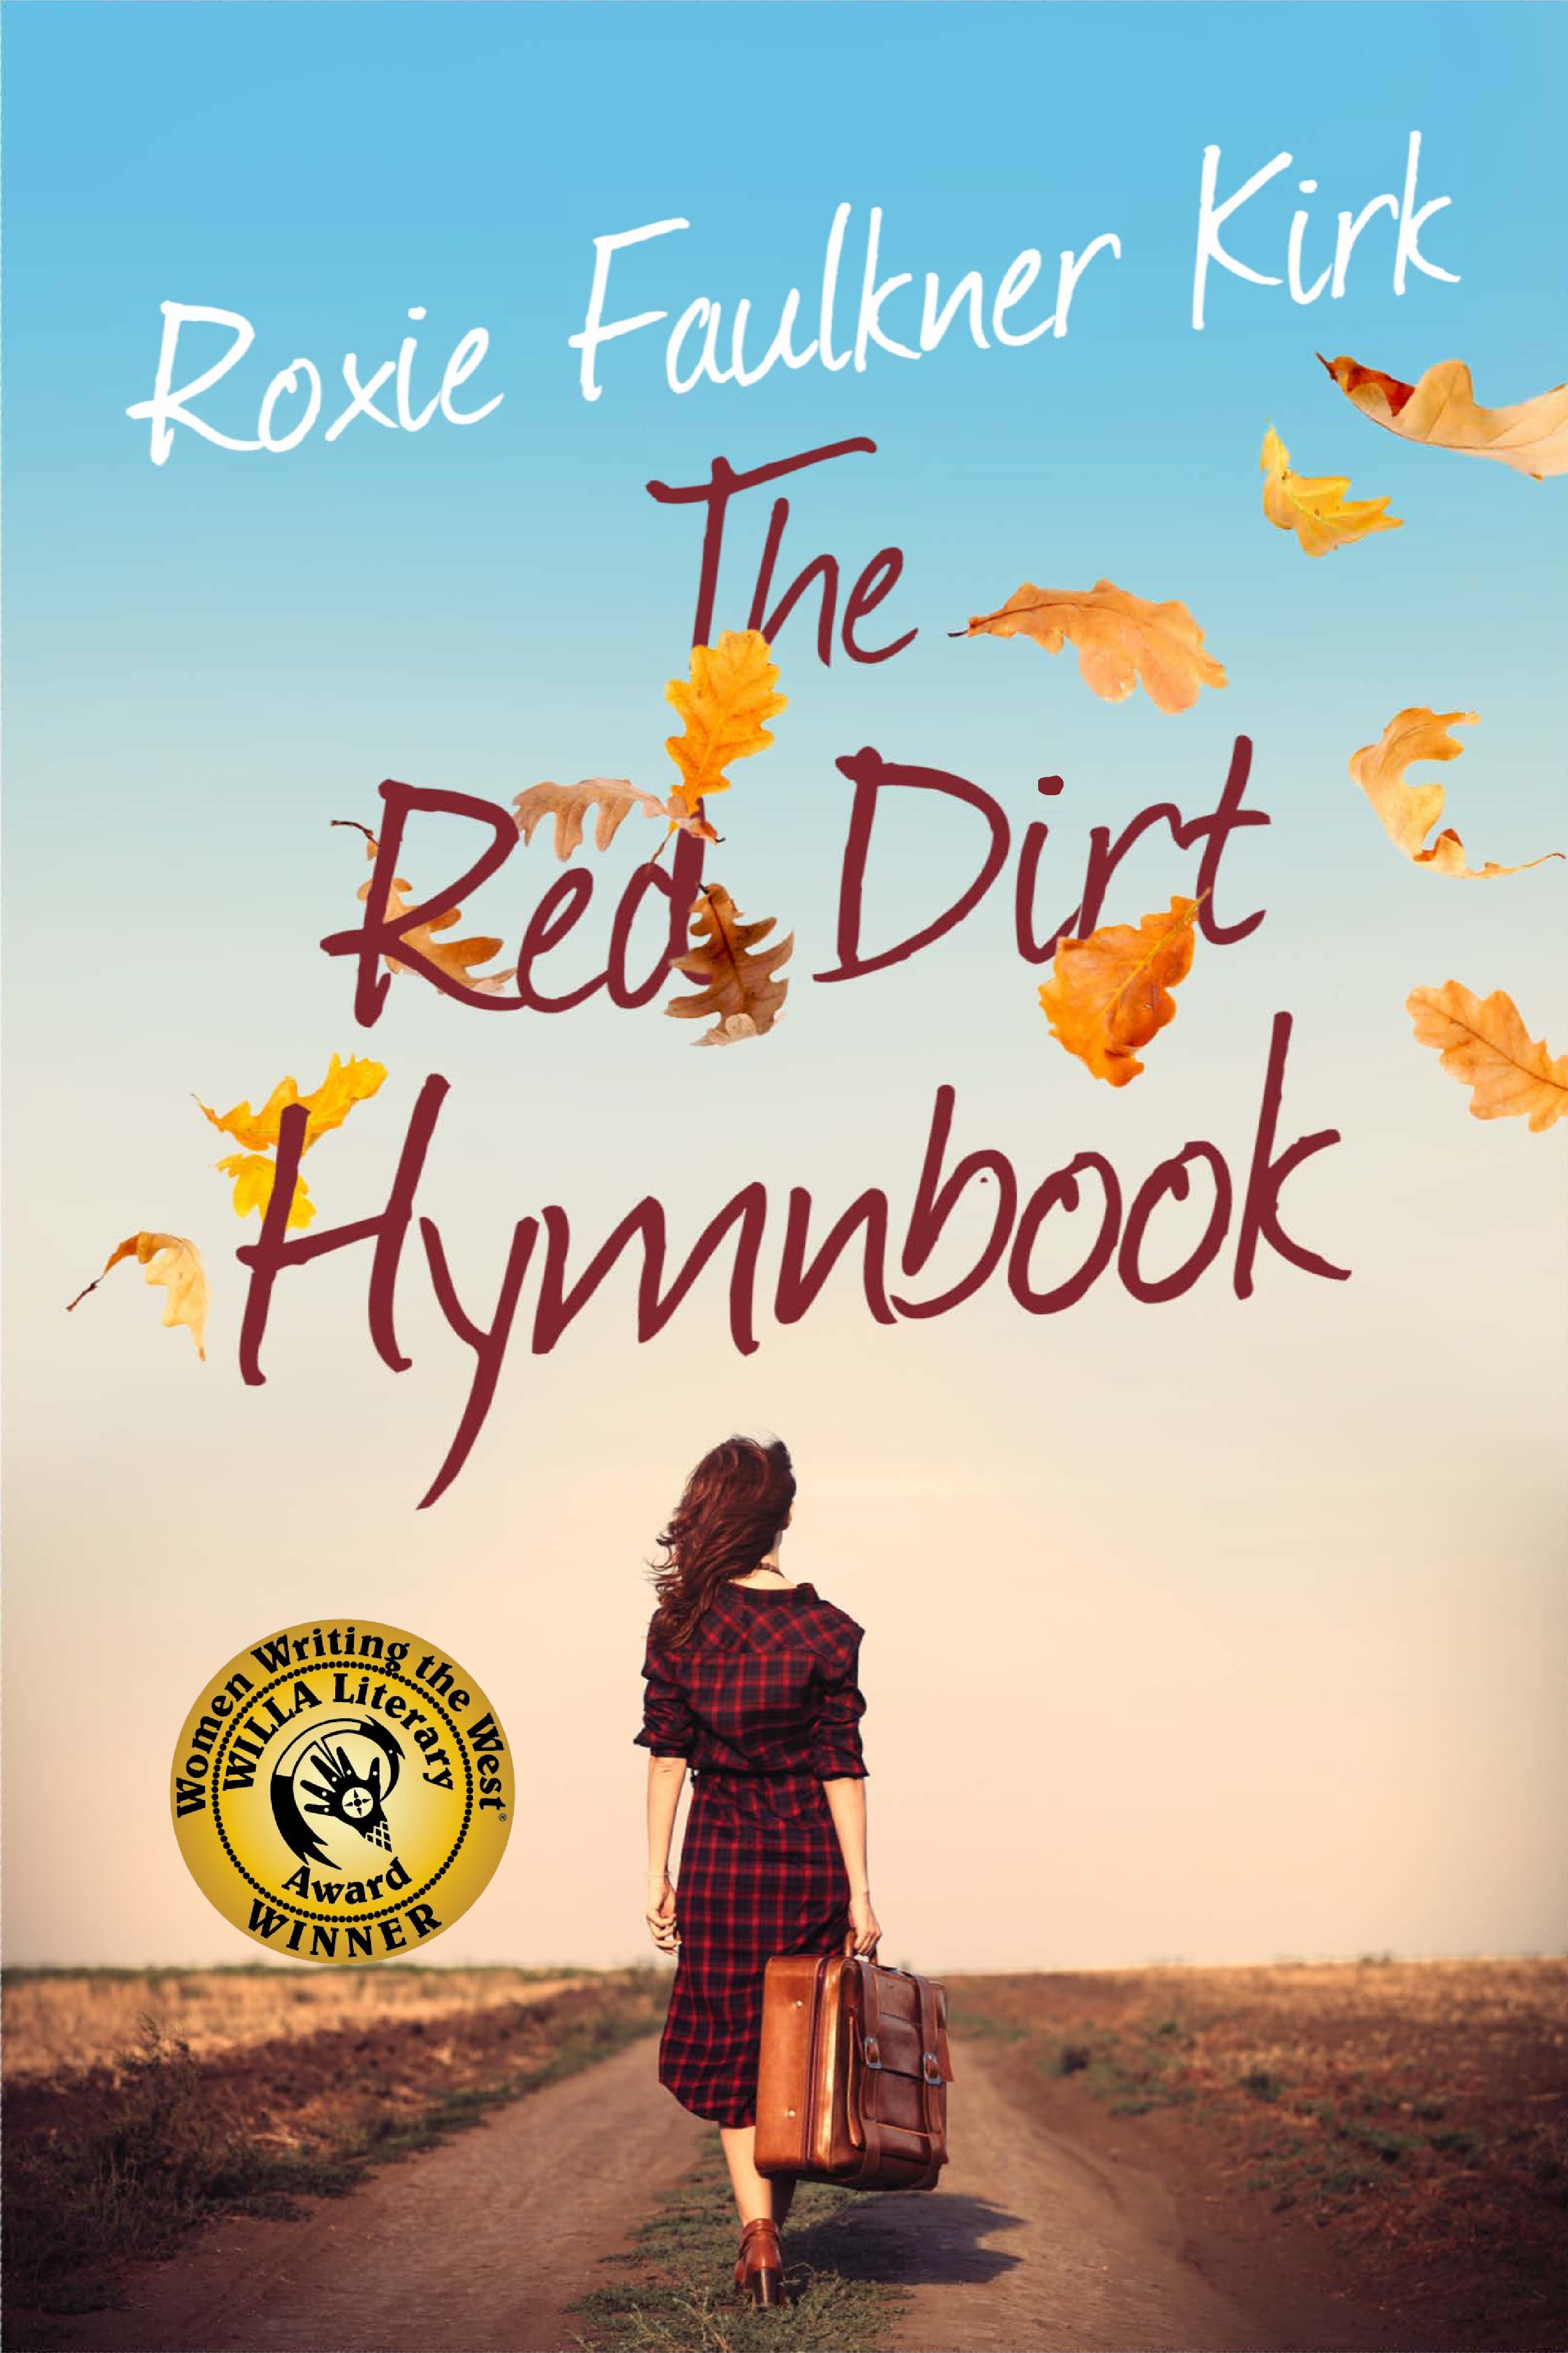 The Red Dirt Hymnbook